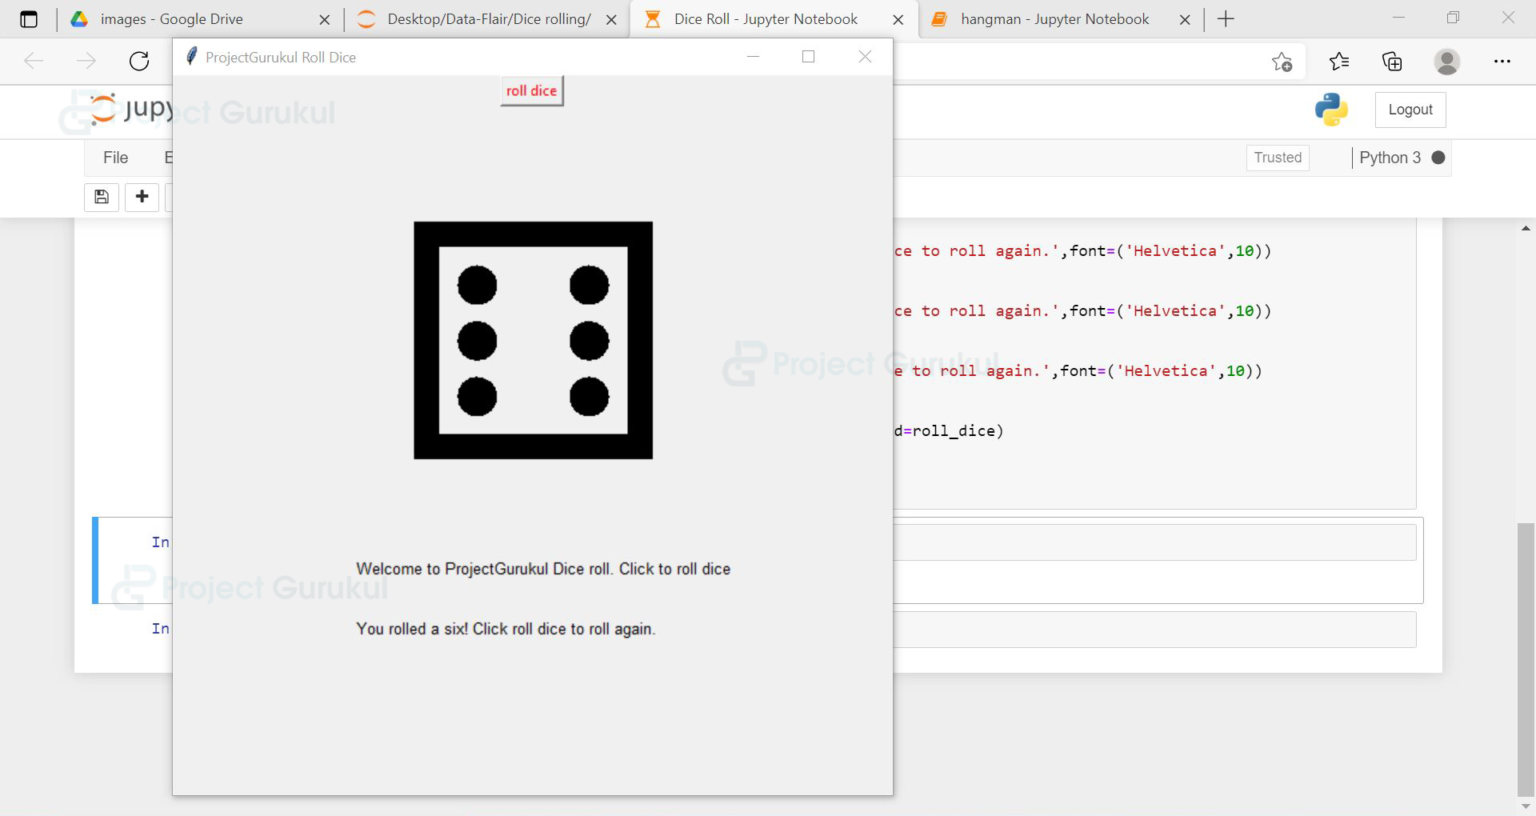 dice-rolling-simulator-in-python-with-source-code-project-gurukul